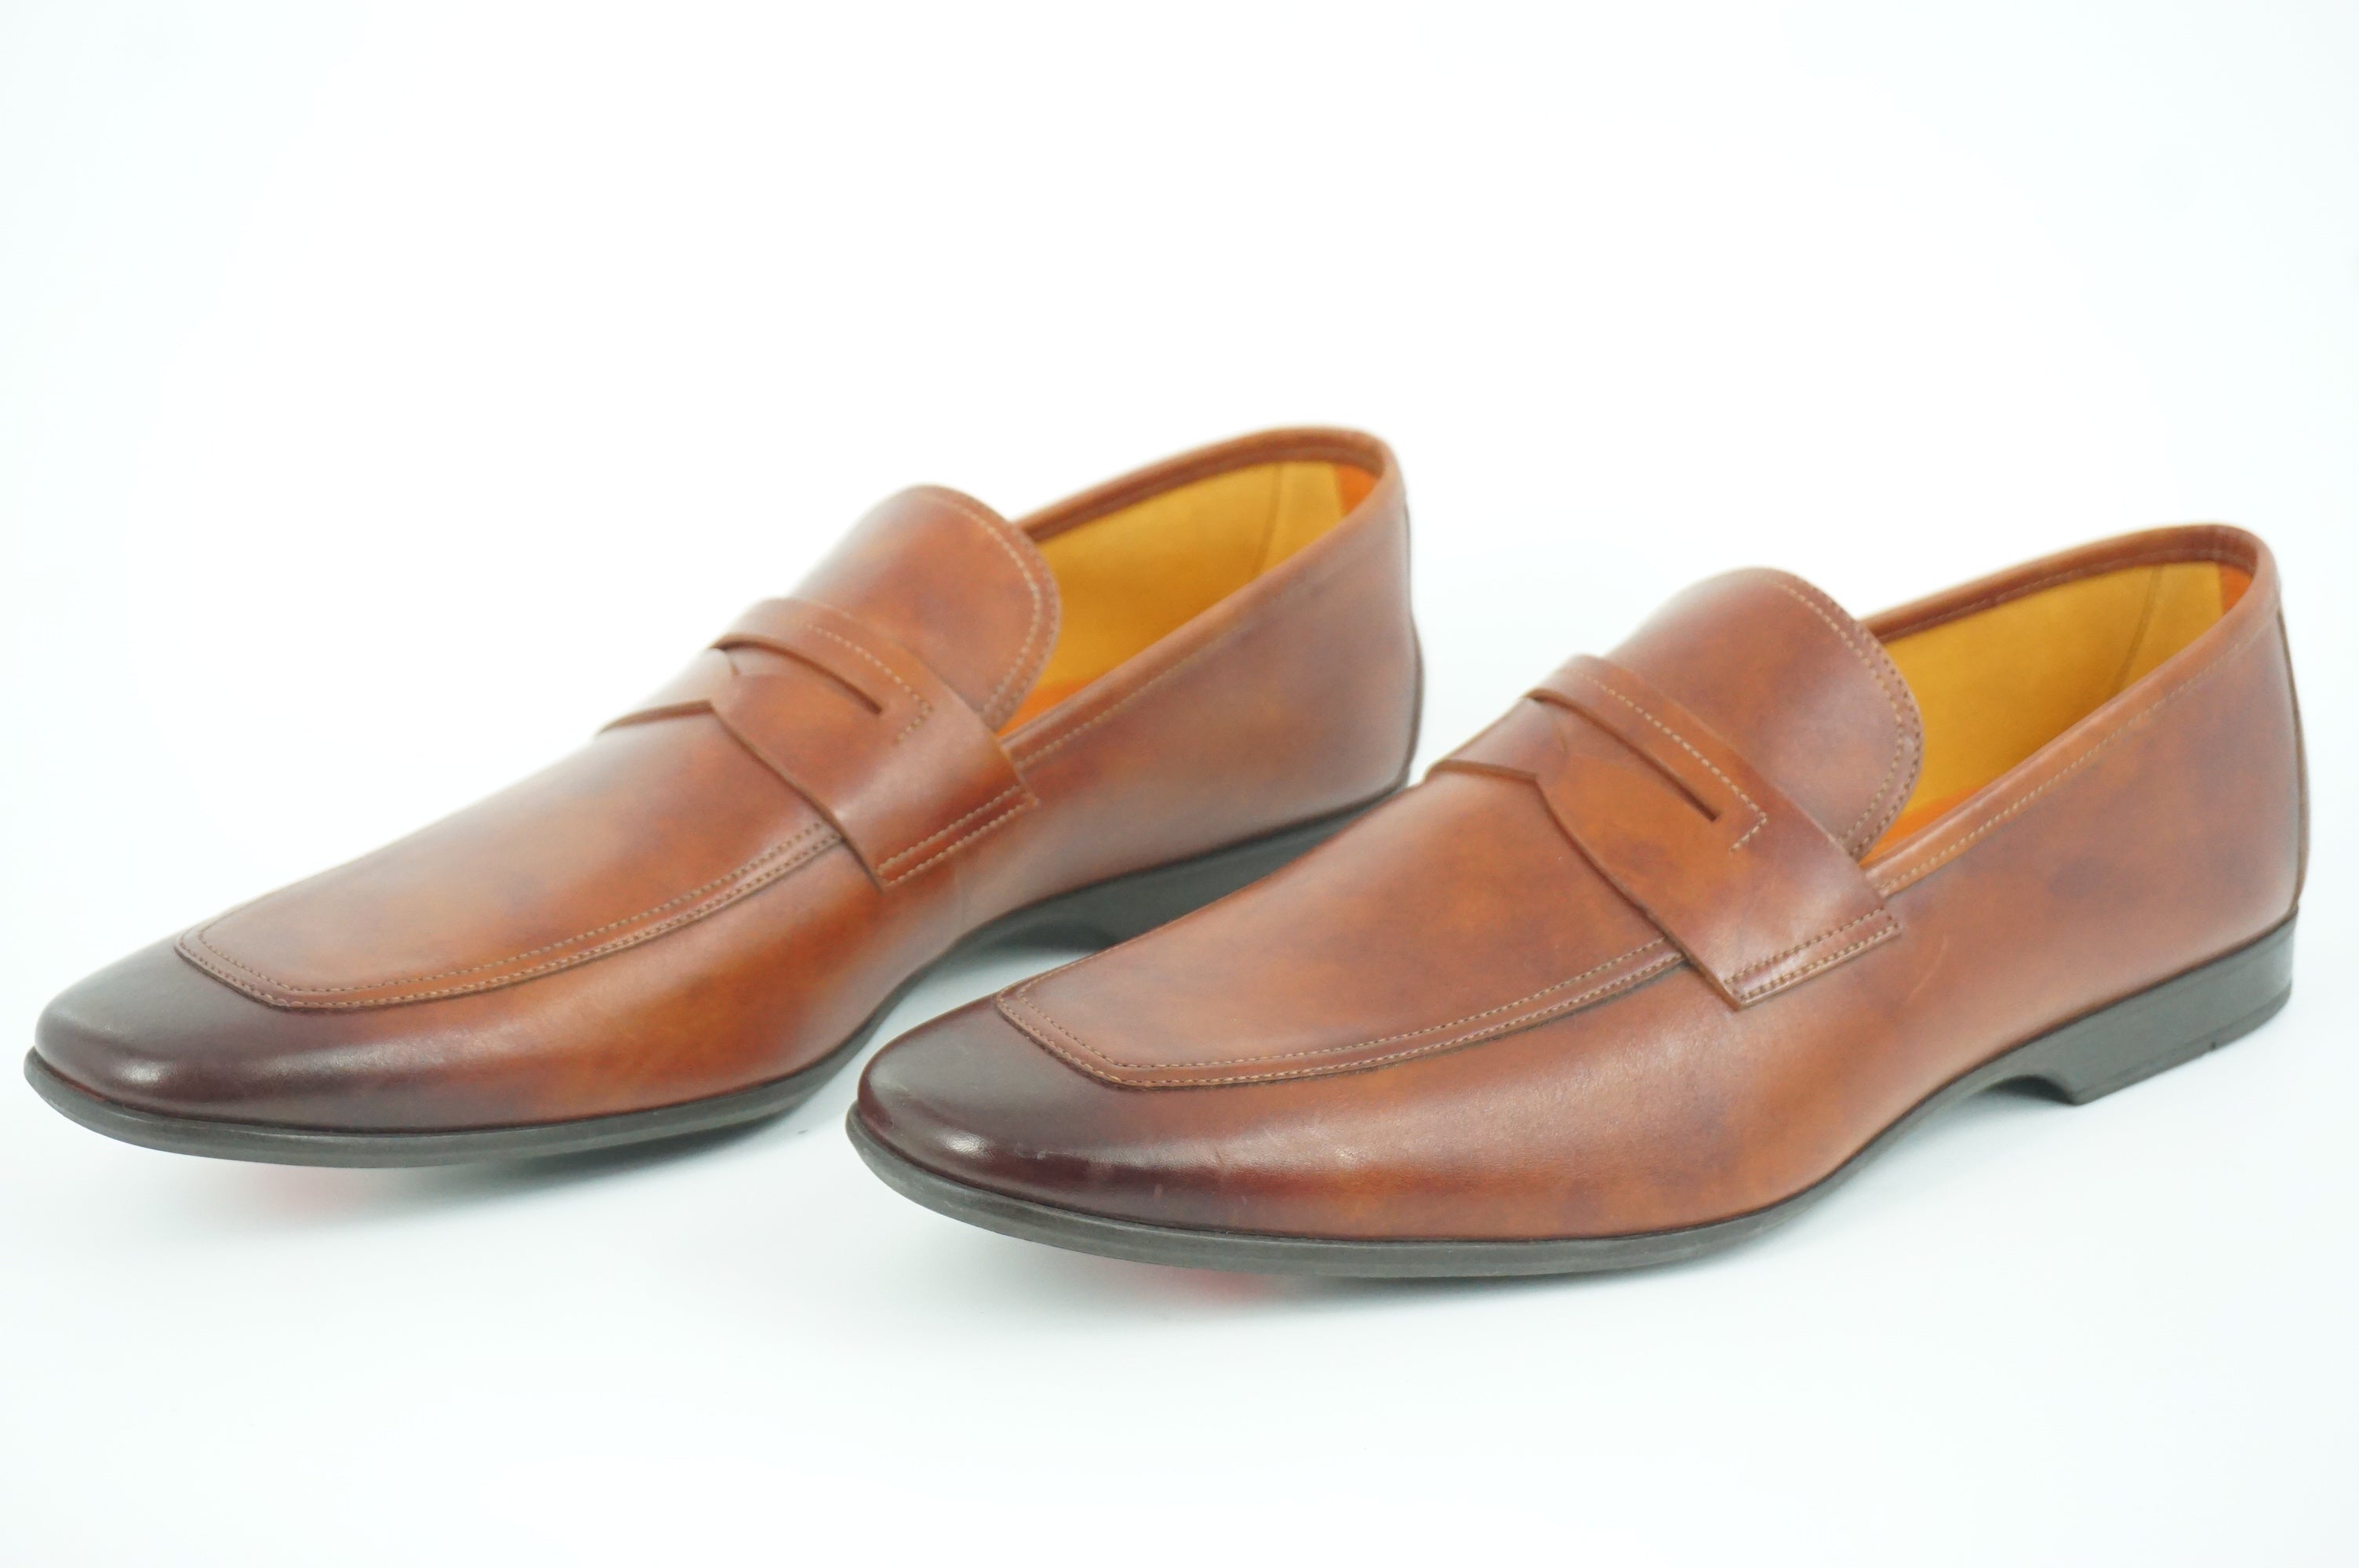 Magnanni Vale Penny Loafers Men's Dress Shoes SZ 13 Brown Leather $350 NIB